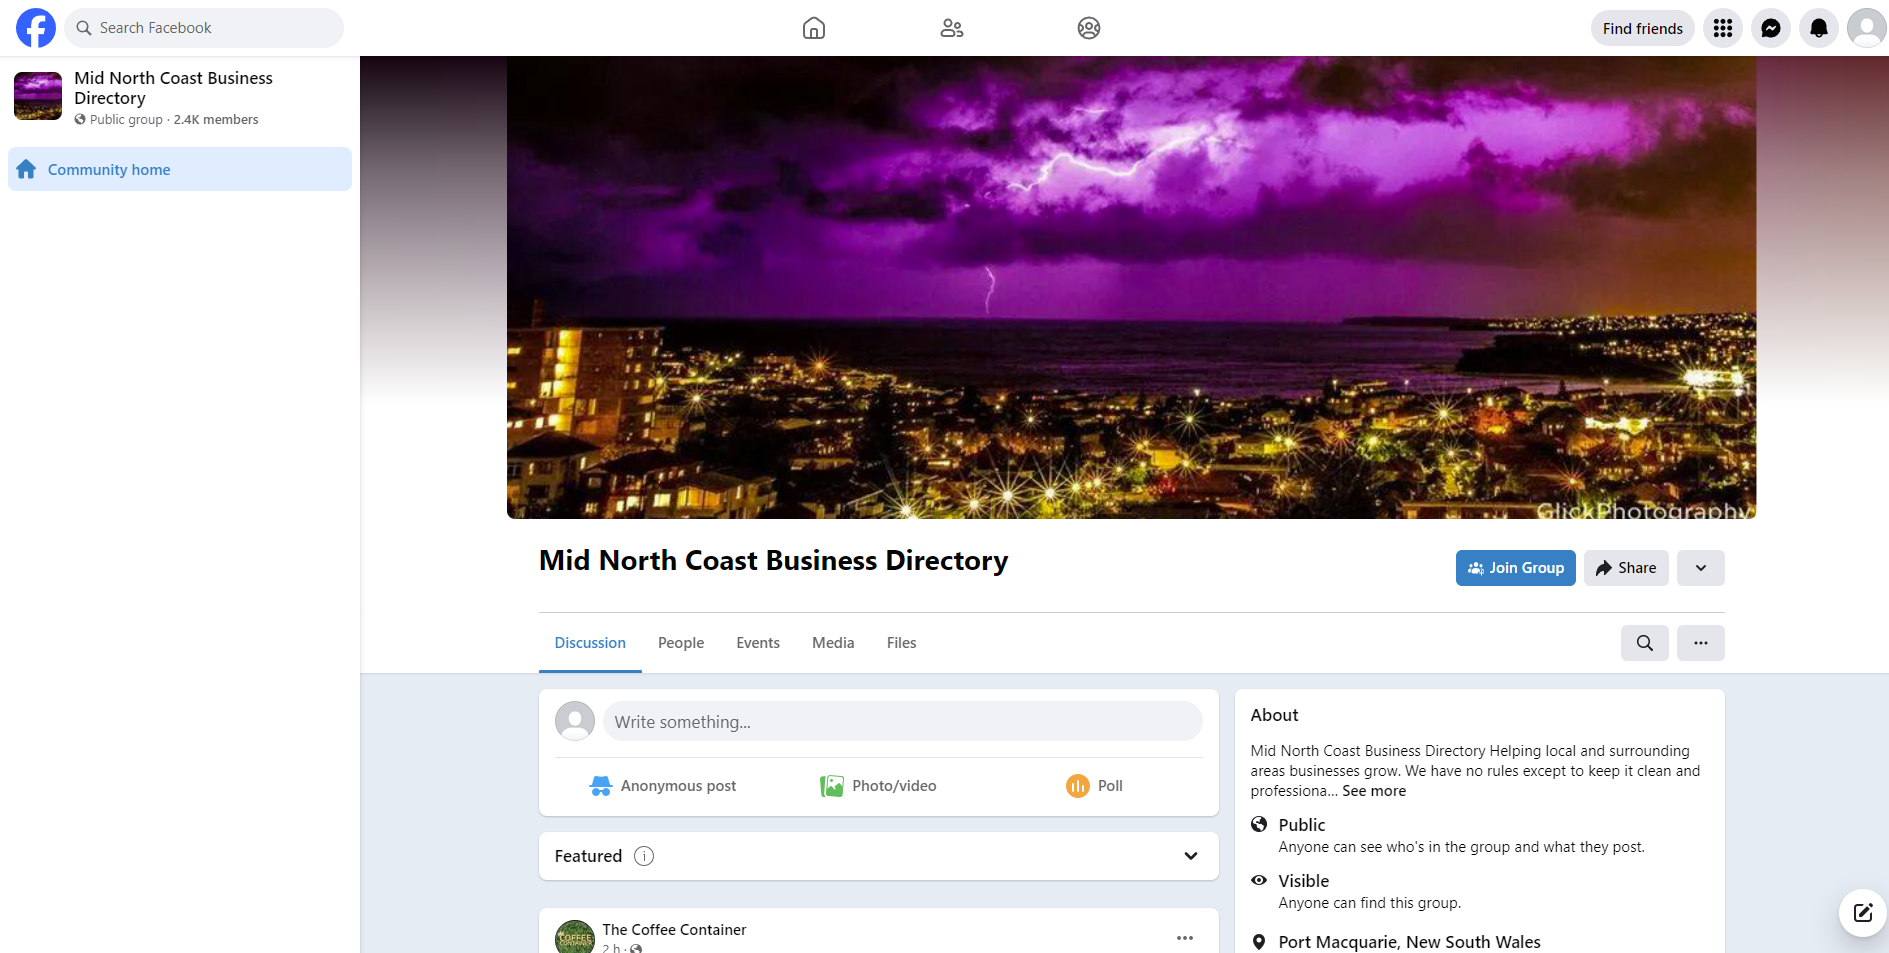 Mid North Coast Business Directory